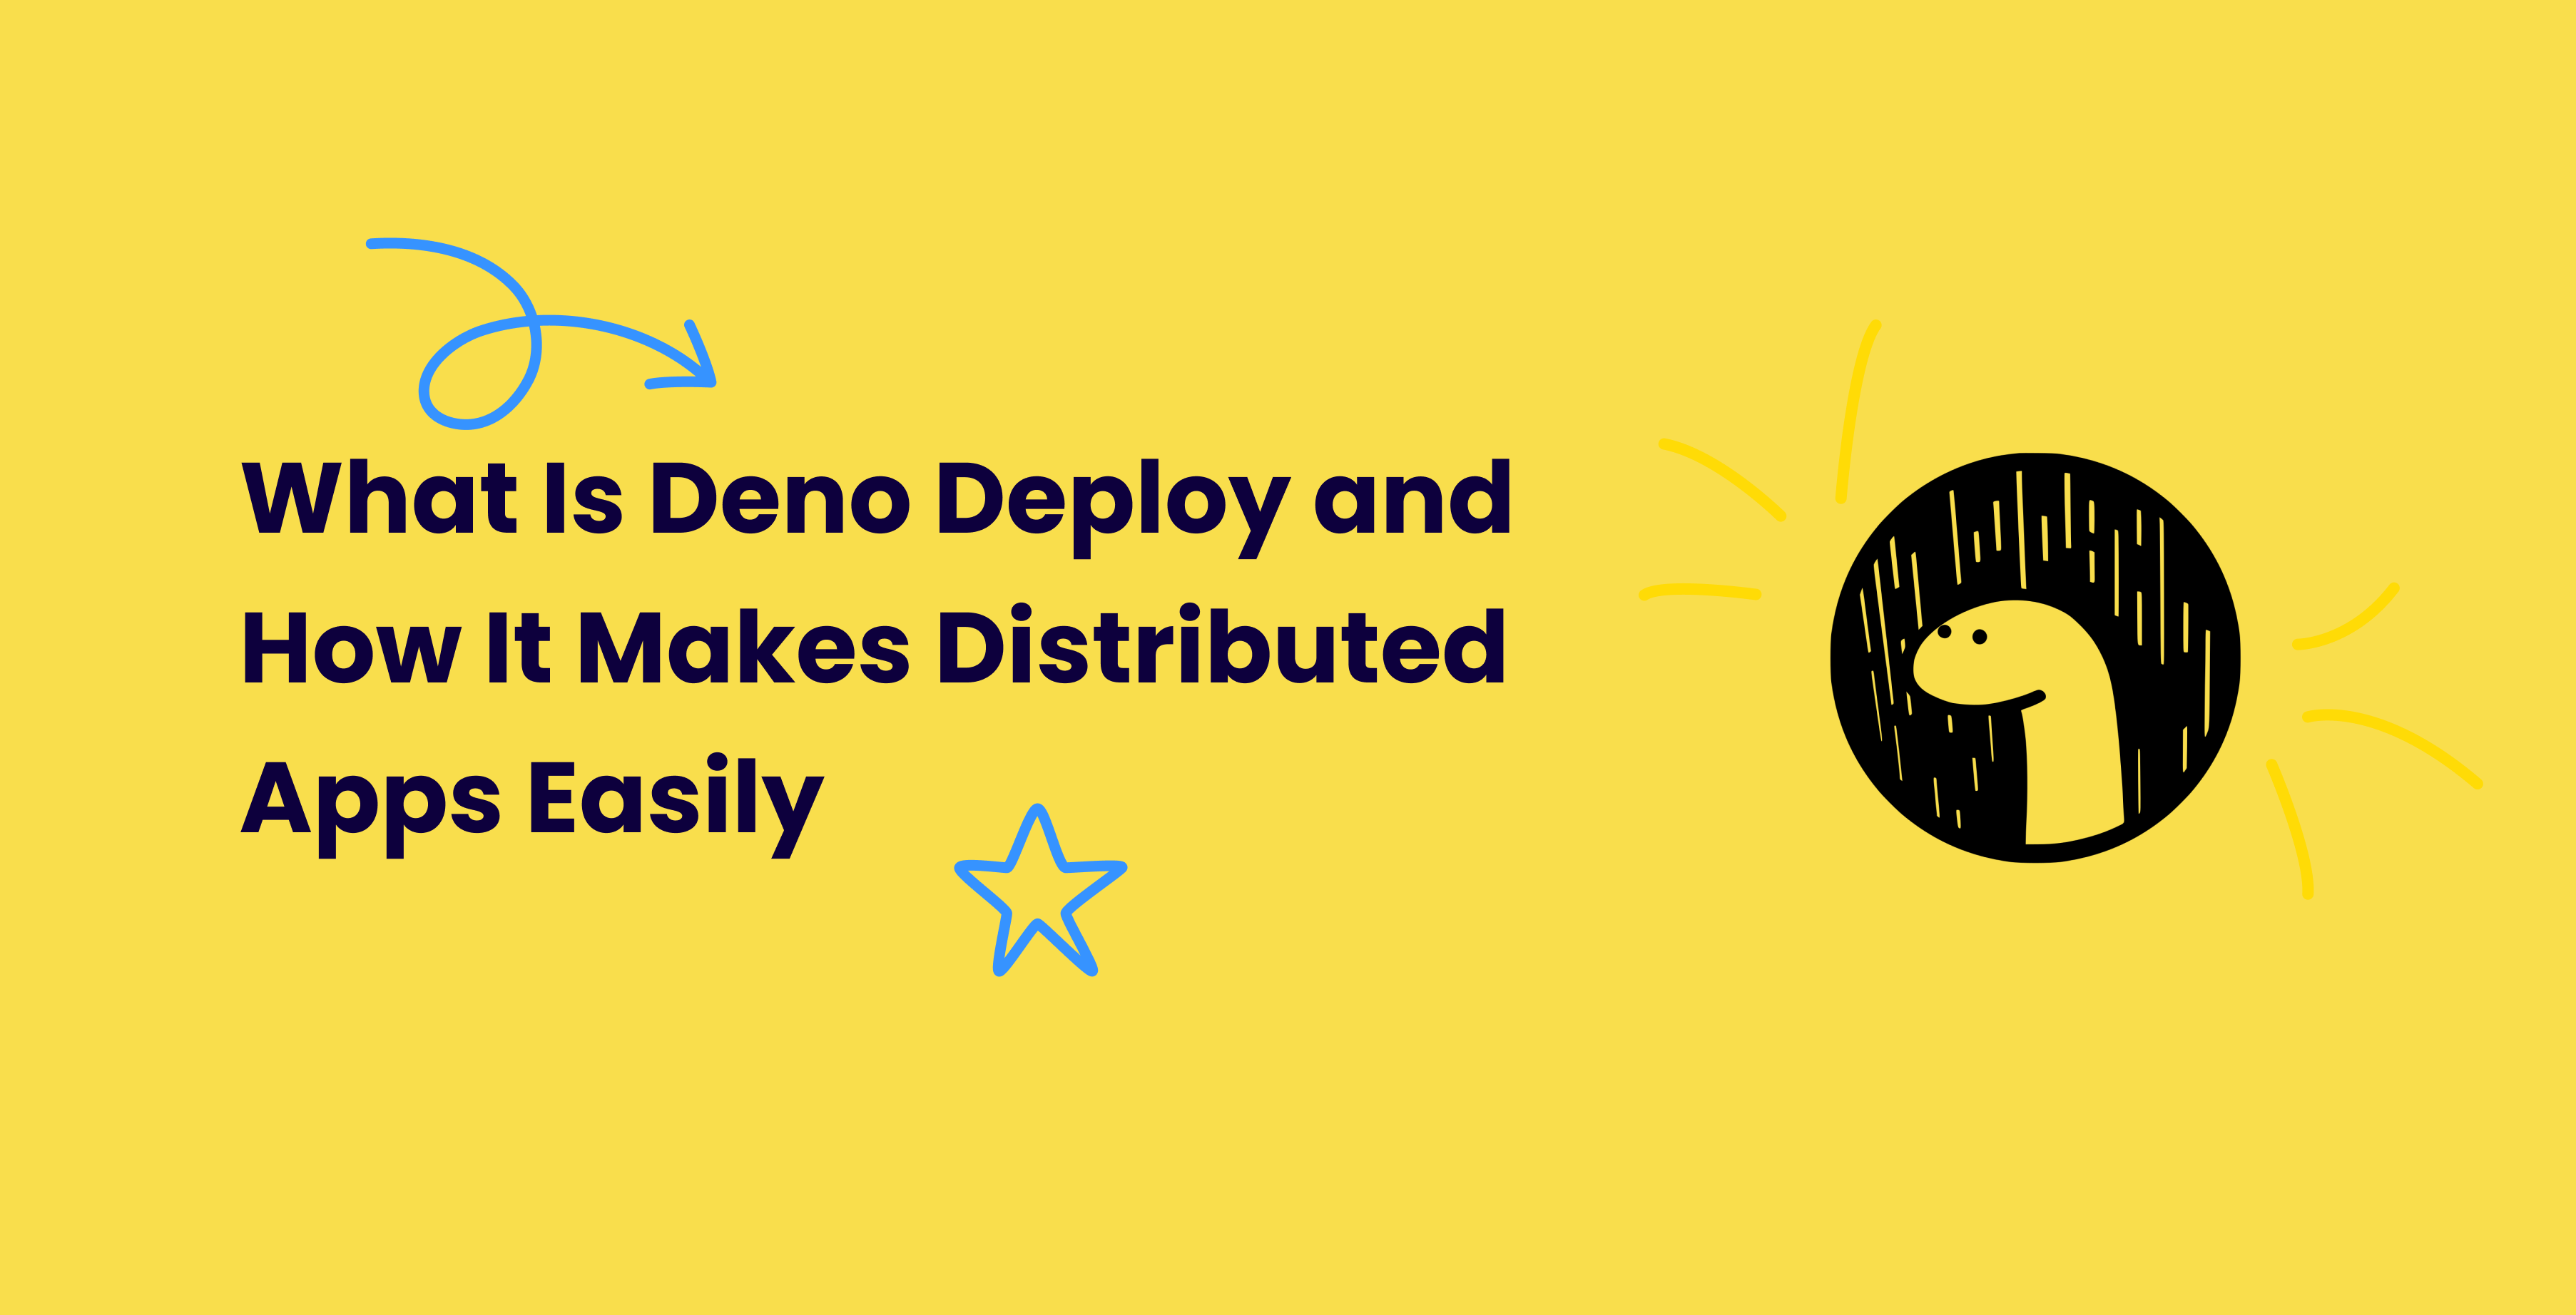 What Is Deno Deploy and How It Makes Distributed Apps Easily